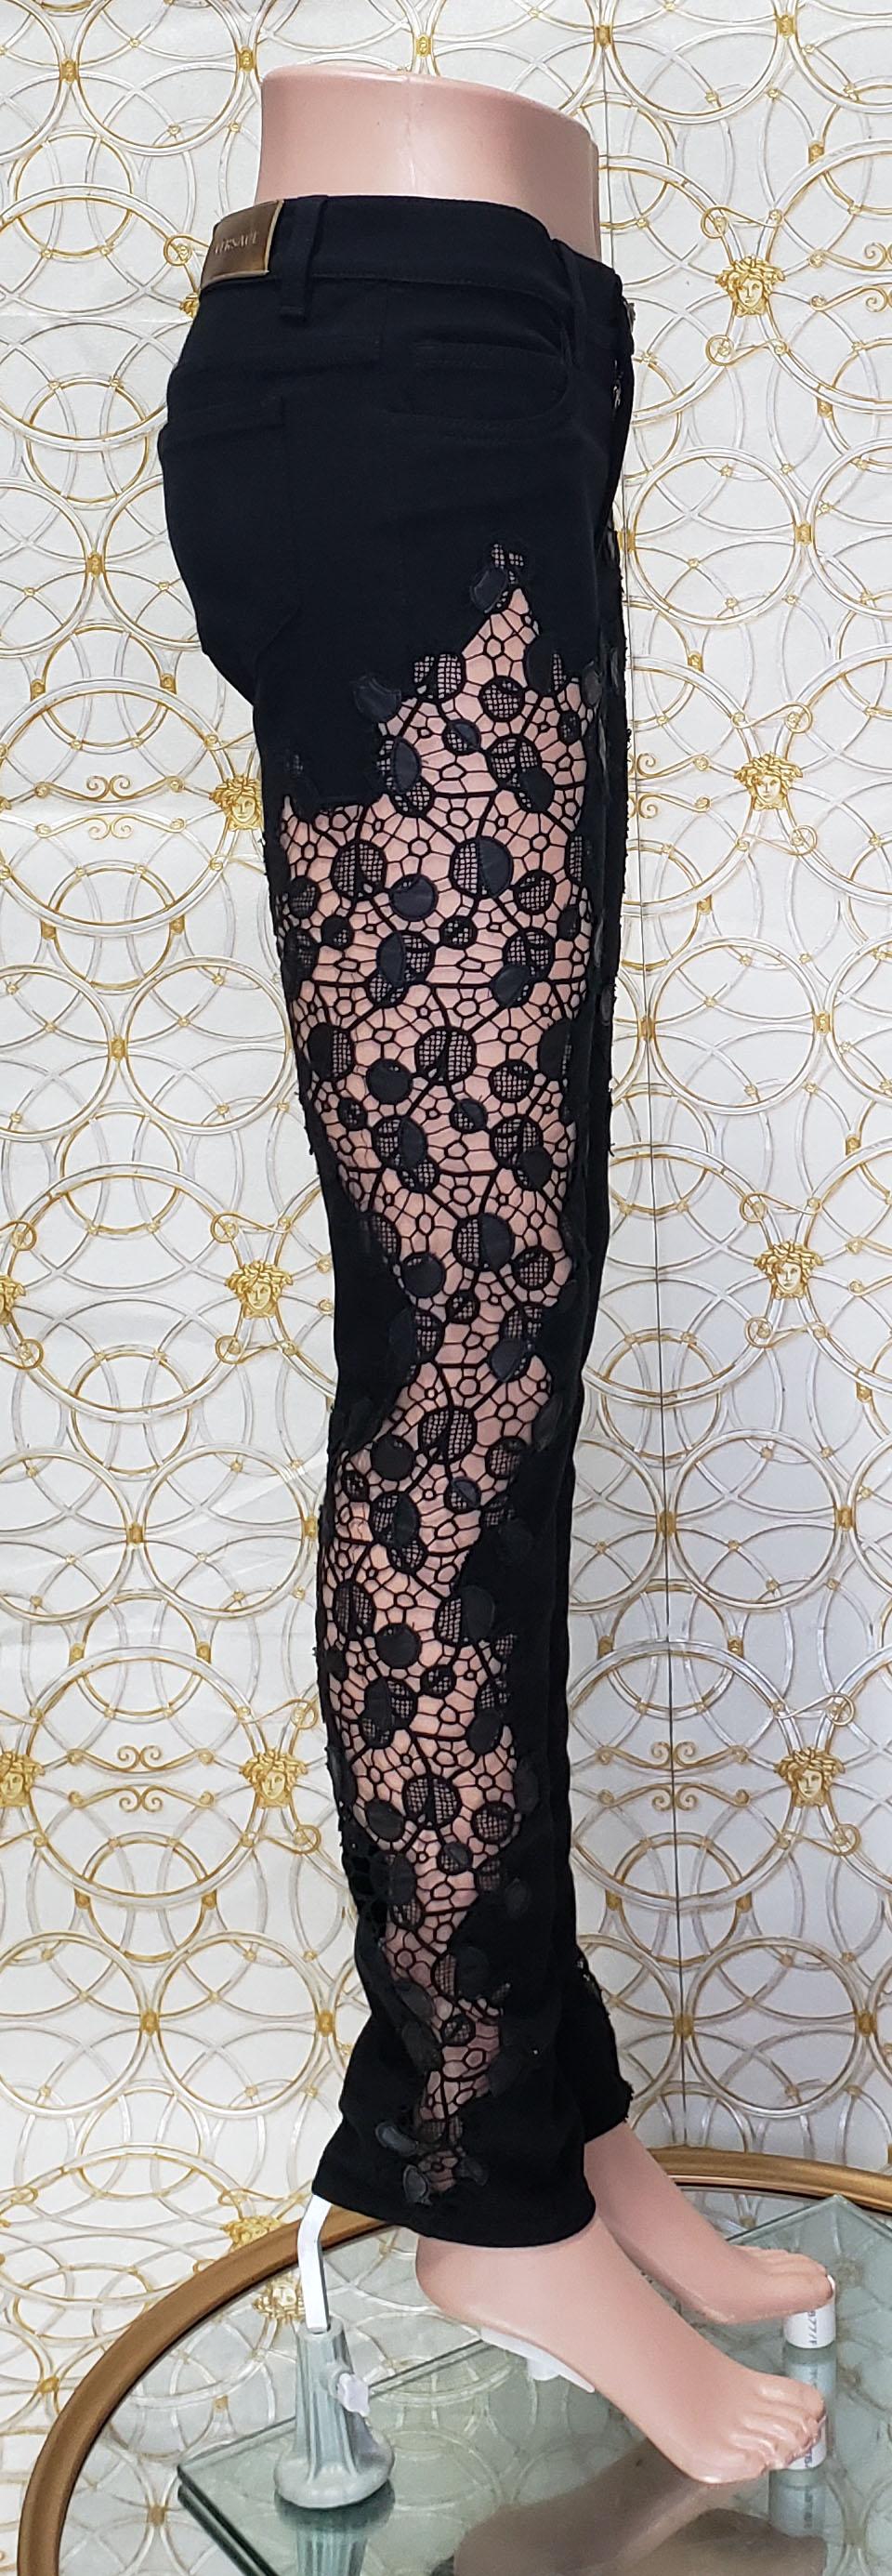 S/S 2013 Look # 15 VERSACE BLACK LACE PANNEL JEANS size 26 In New Condition For Sale In Montgomery, TX